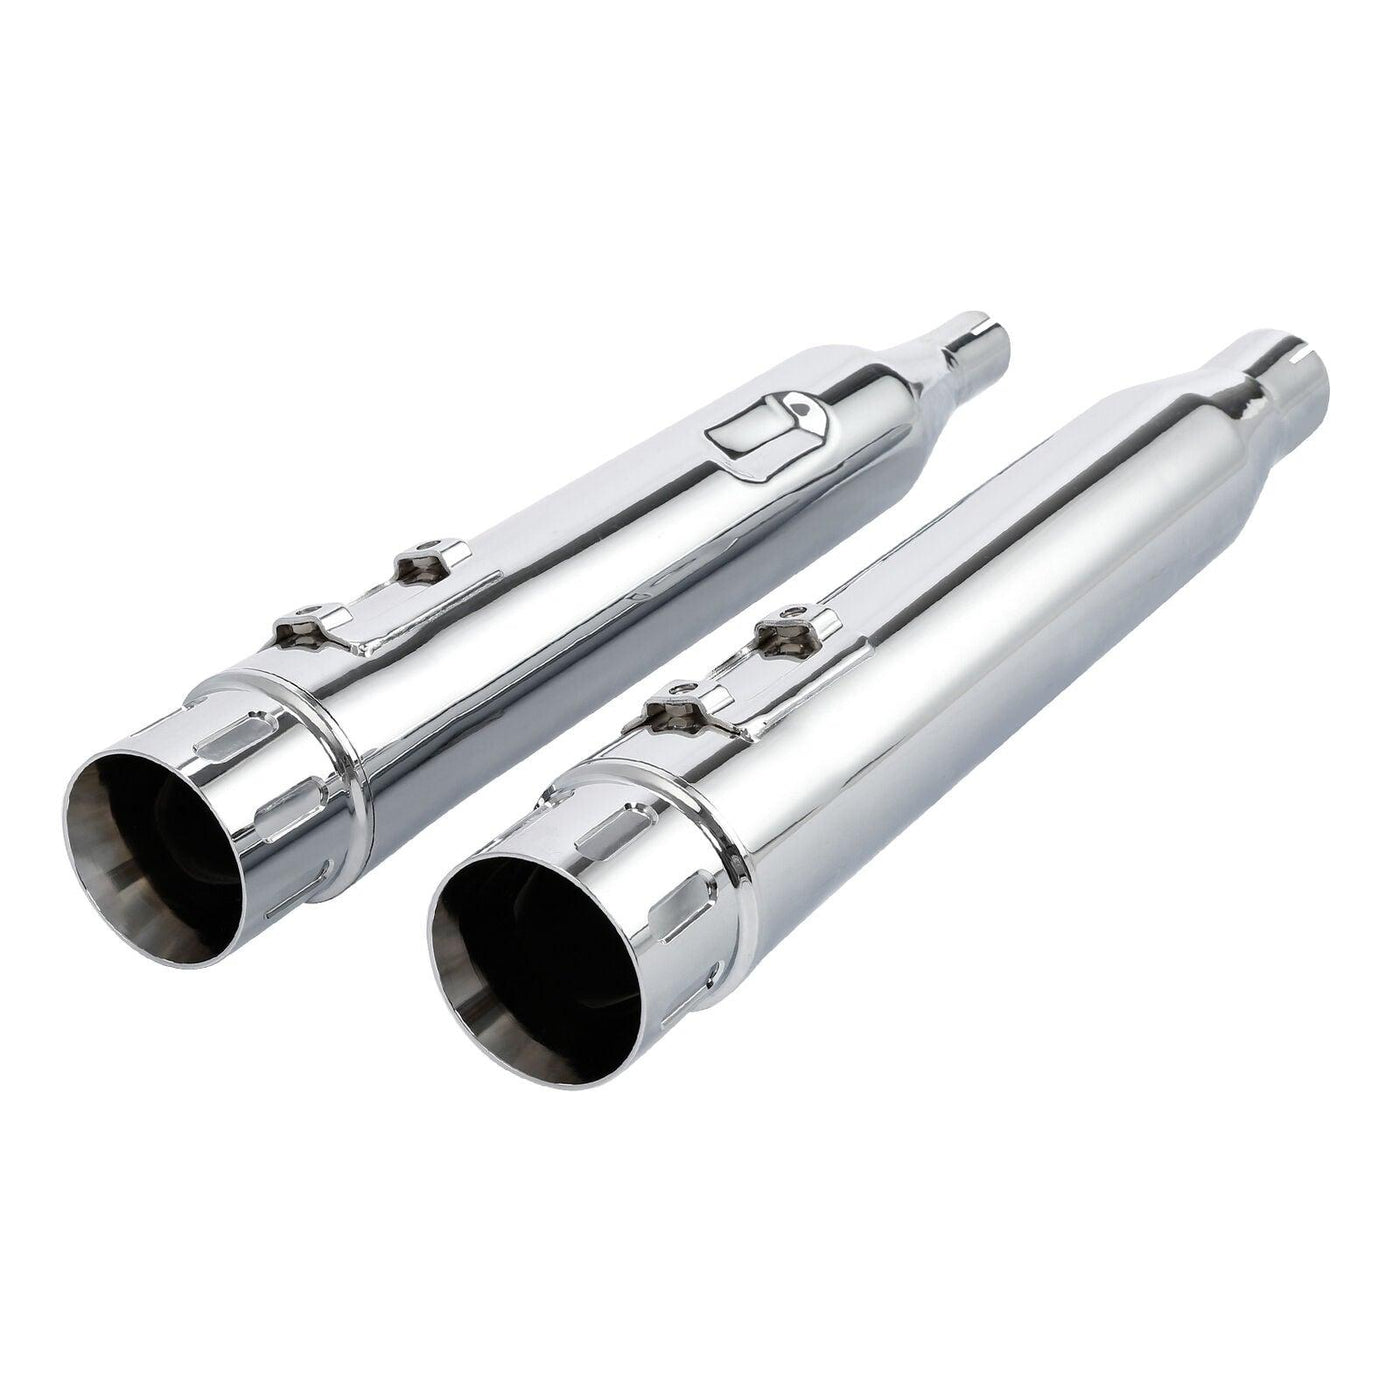 Chrome Dual Exhaust Muffler Slip-on Pipes Fit For Harley Street Glide 2017-2022 - Moto Life Products